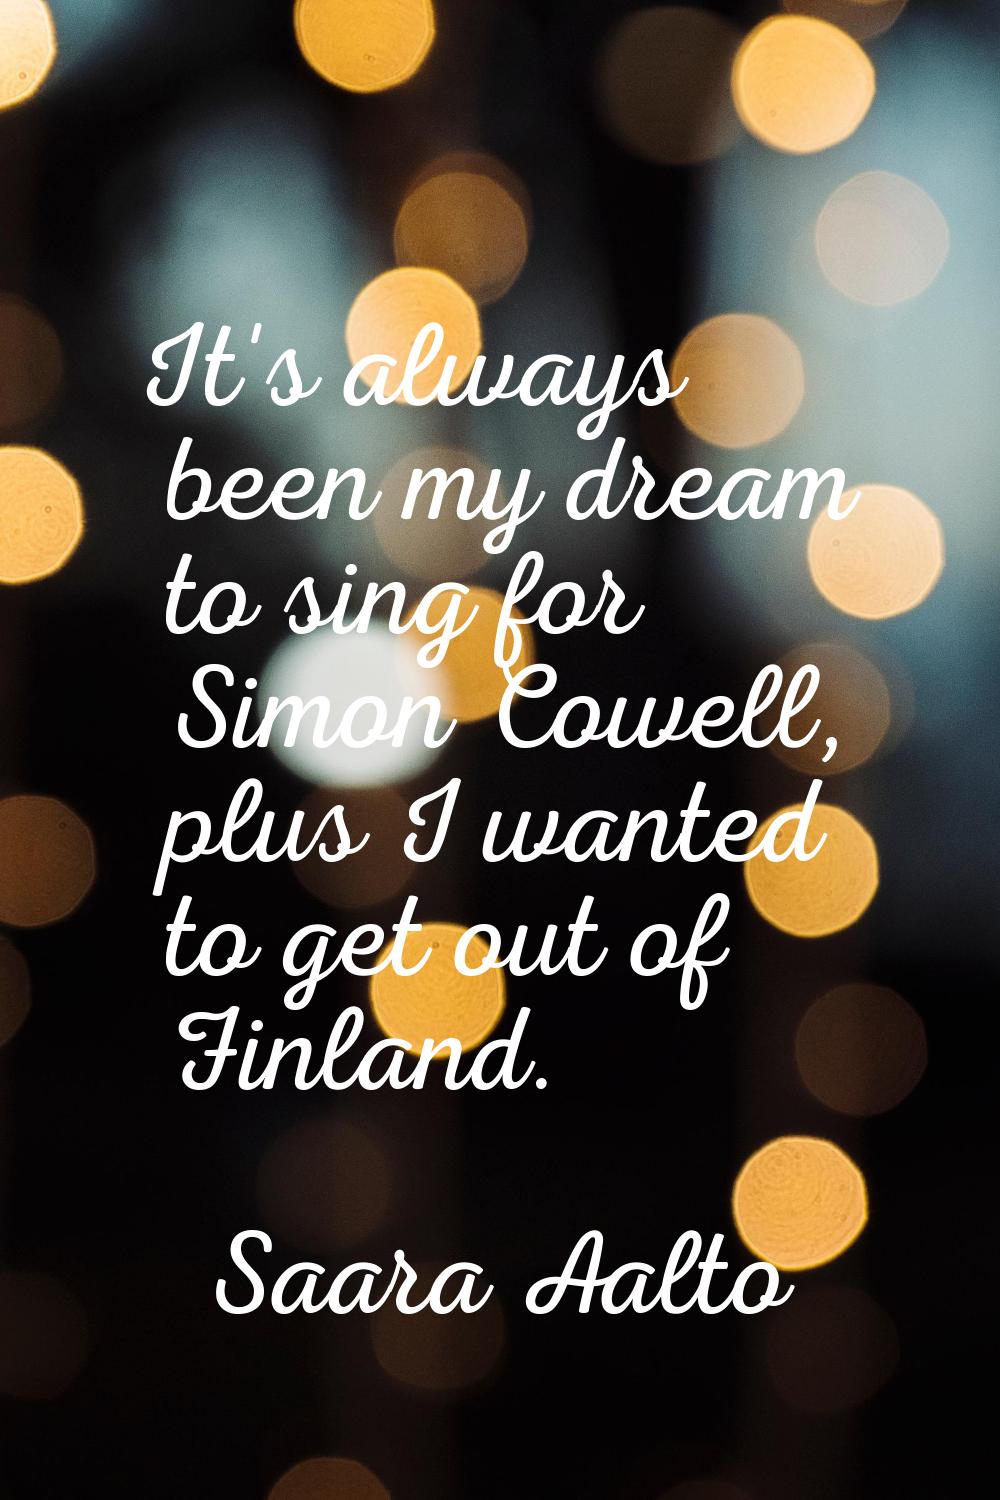 It's always been my dream to sing for Simon Cowell, plus I wanted to get out of Finland.